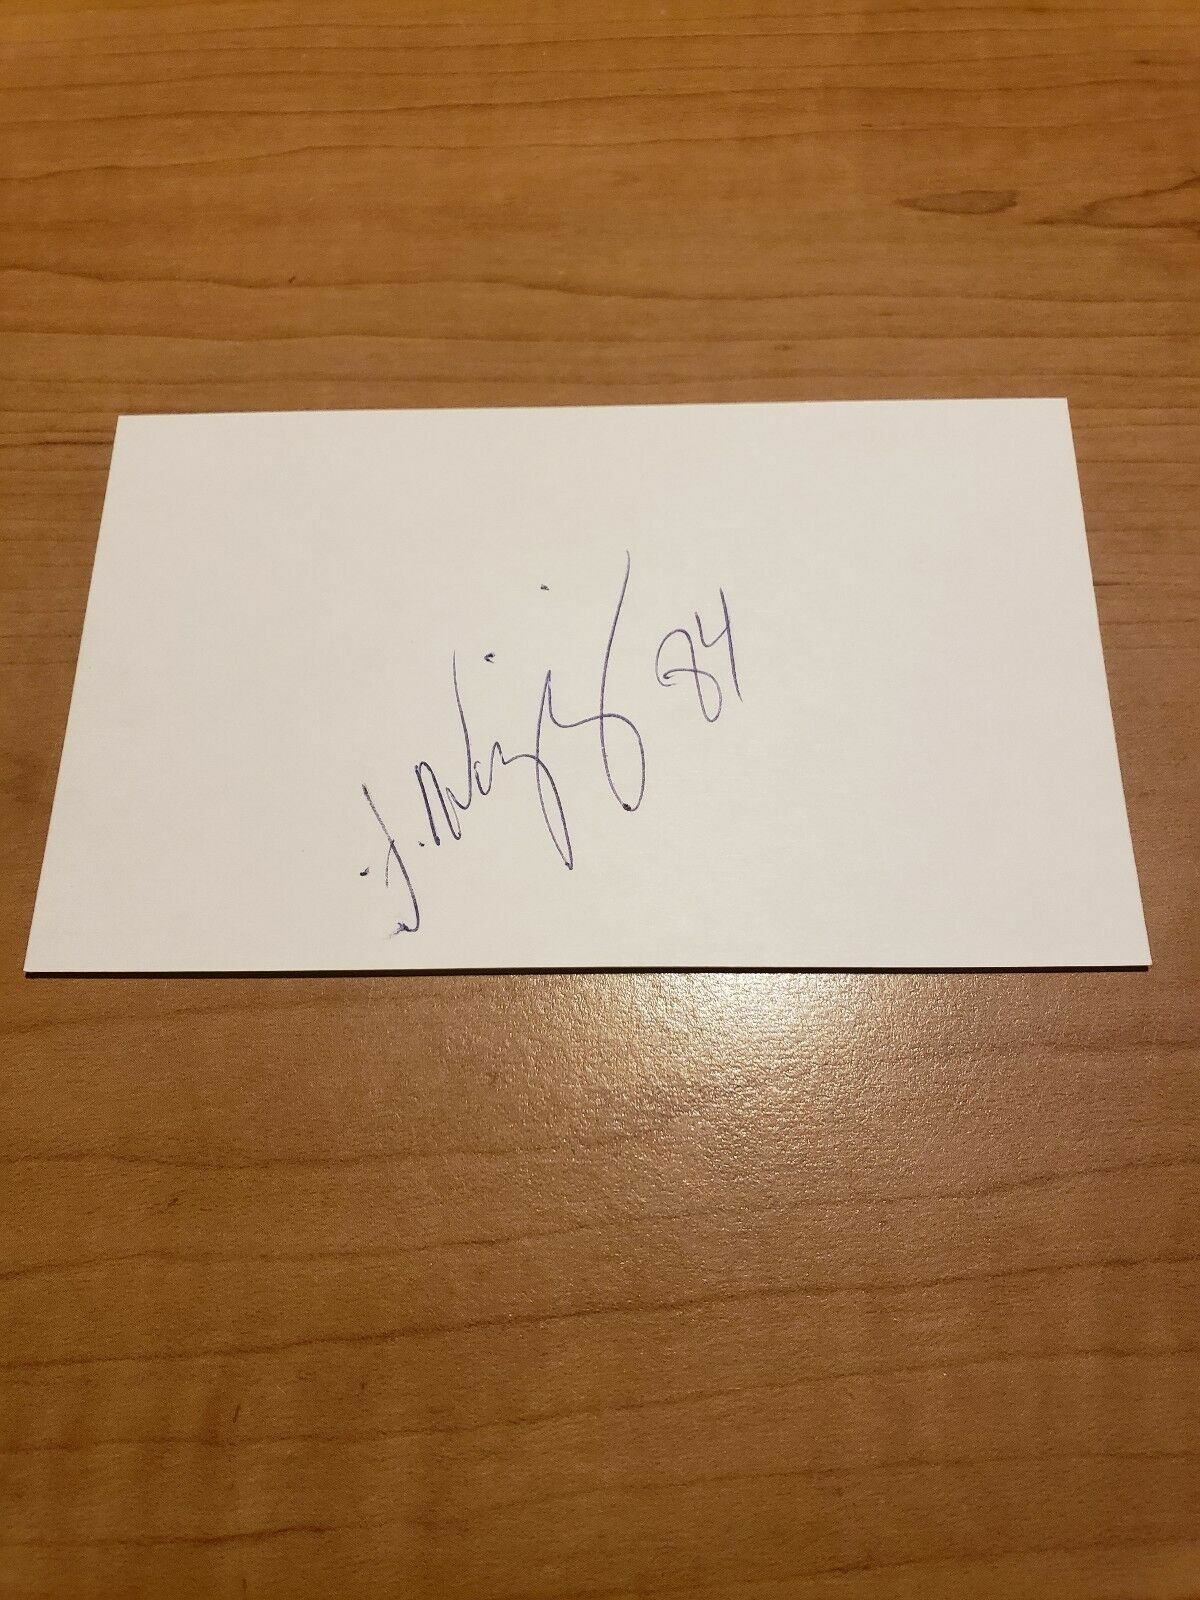 JERMAINE WIGGINS - FOOTBALL - AUTOGRAPH SIGNED - INDEX CARD -AUTHENTIC - A5350